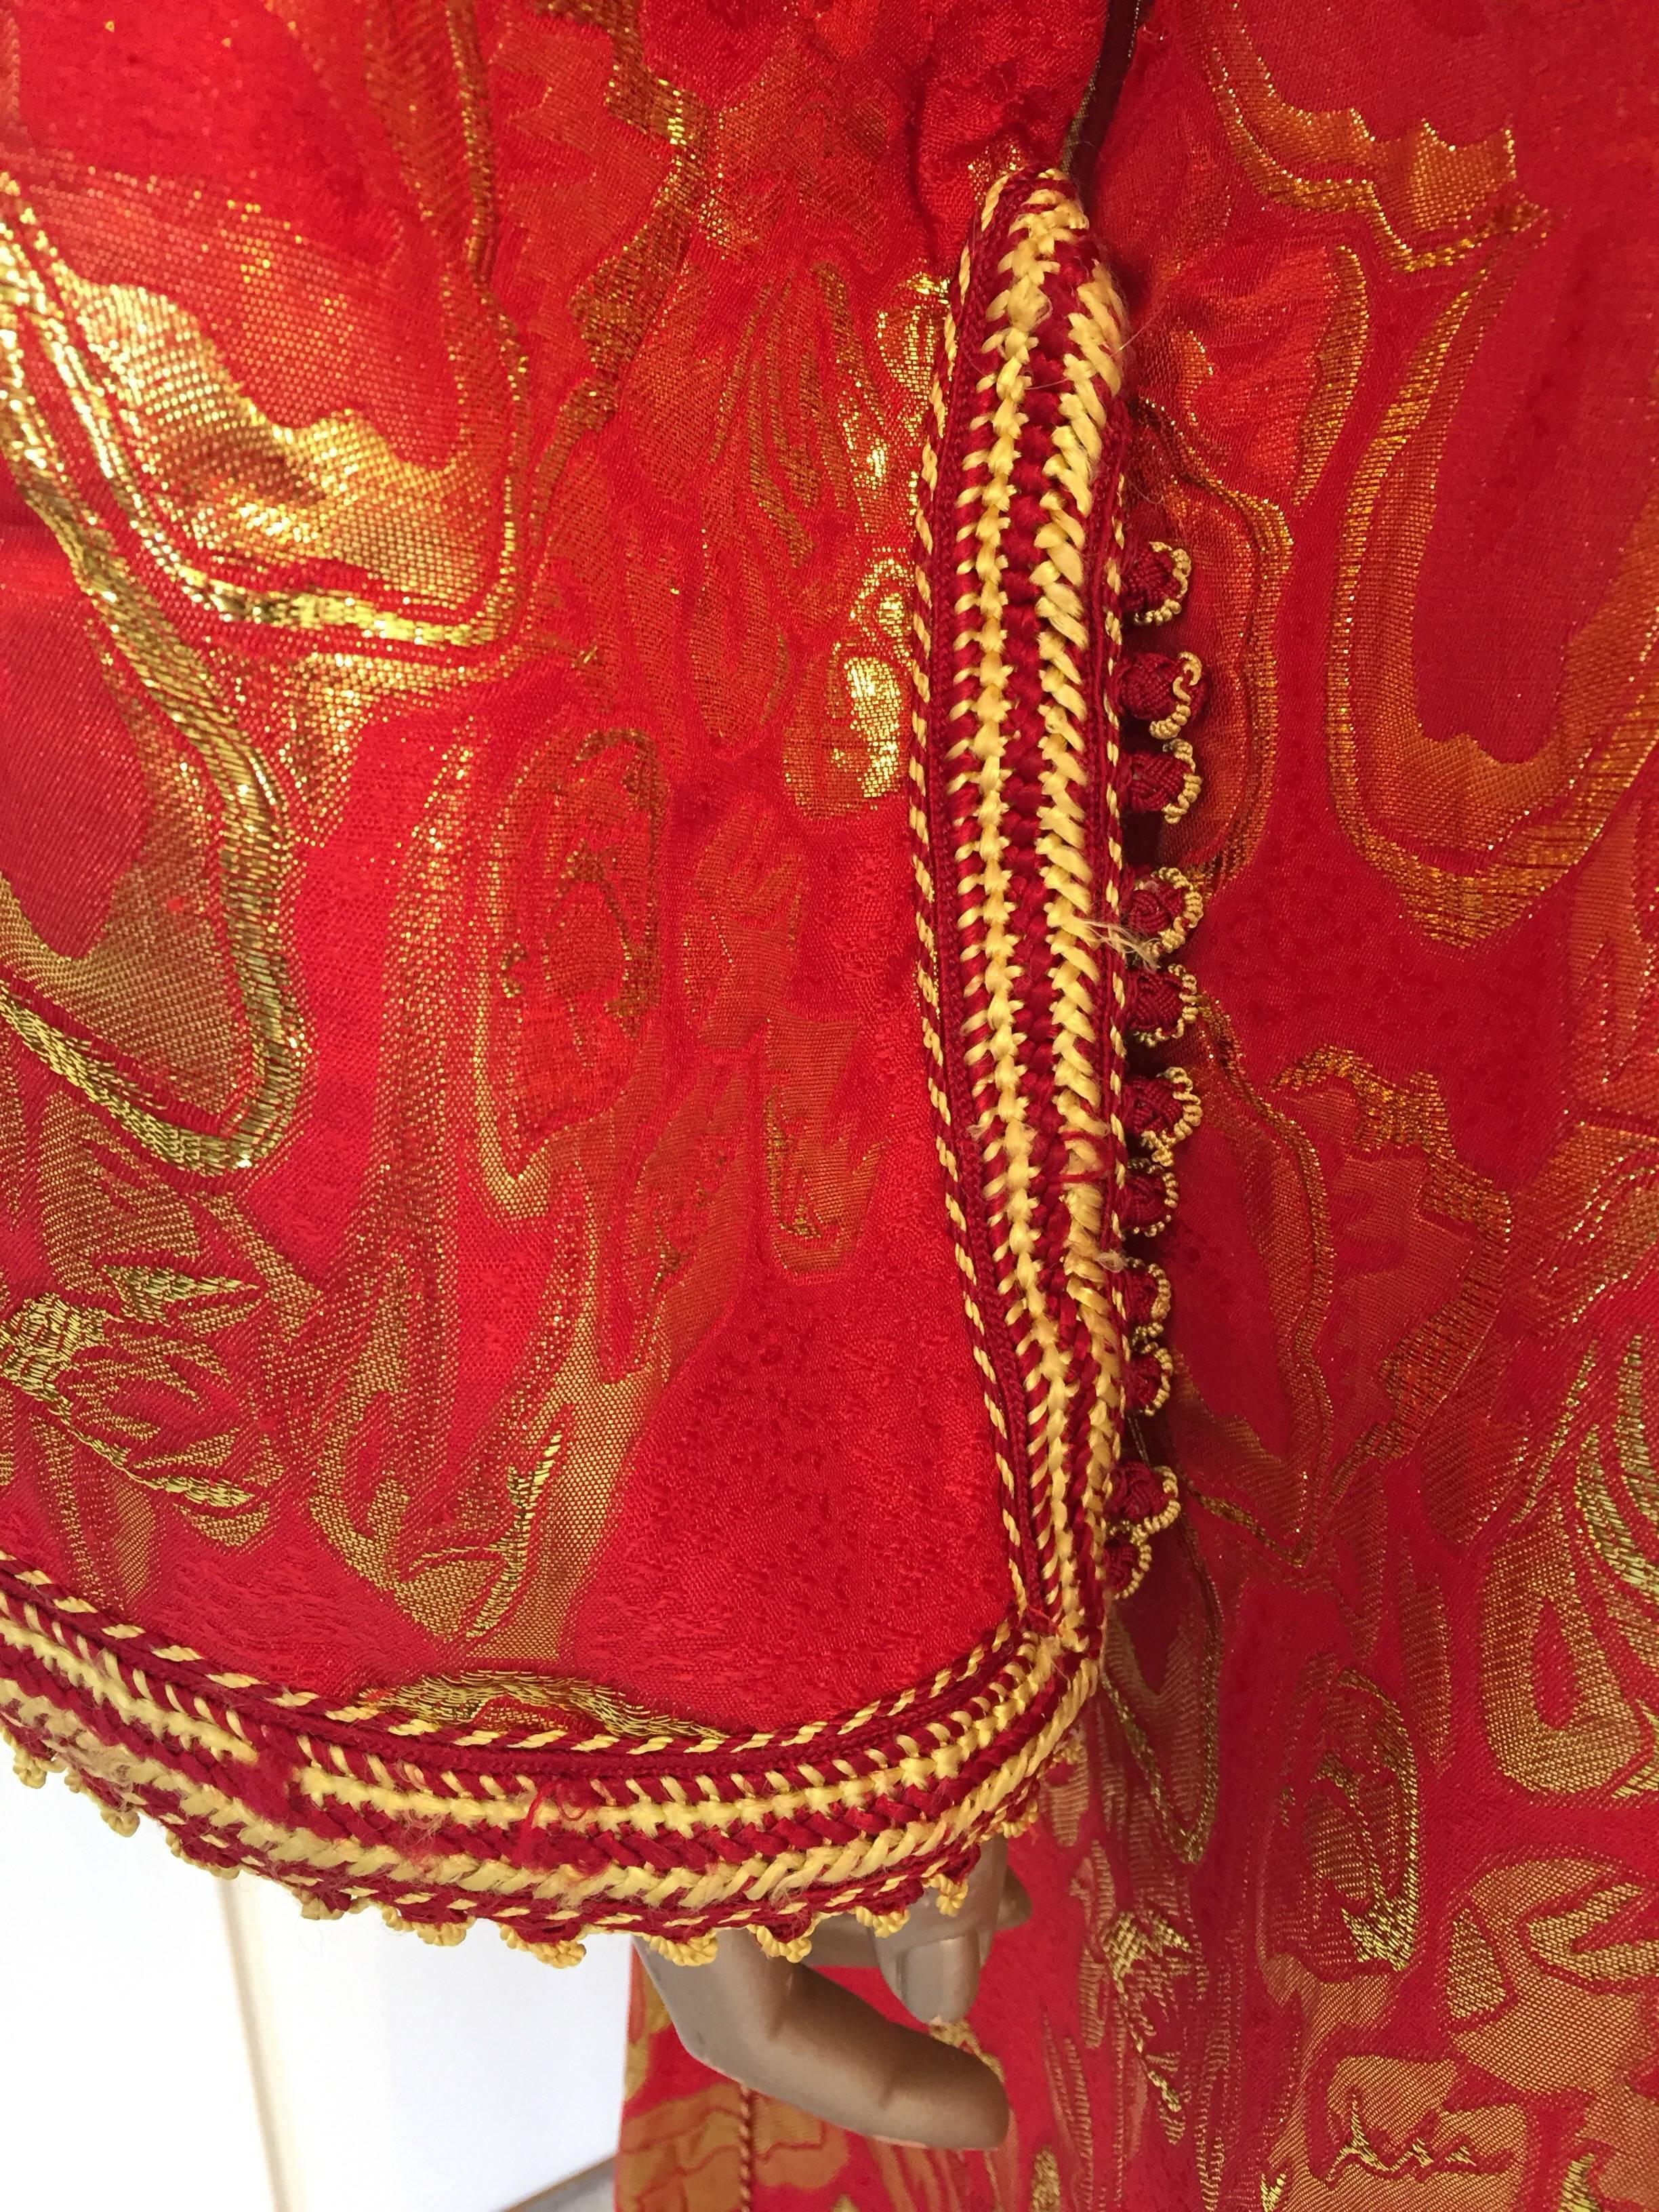 Vintage Moroccan Kaftan 1970s Red and Gold Floral Brocade Caftan Maxi Dress For Sale 1